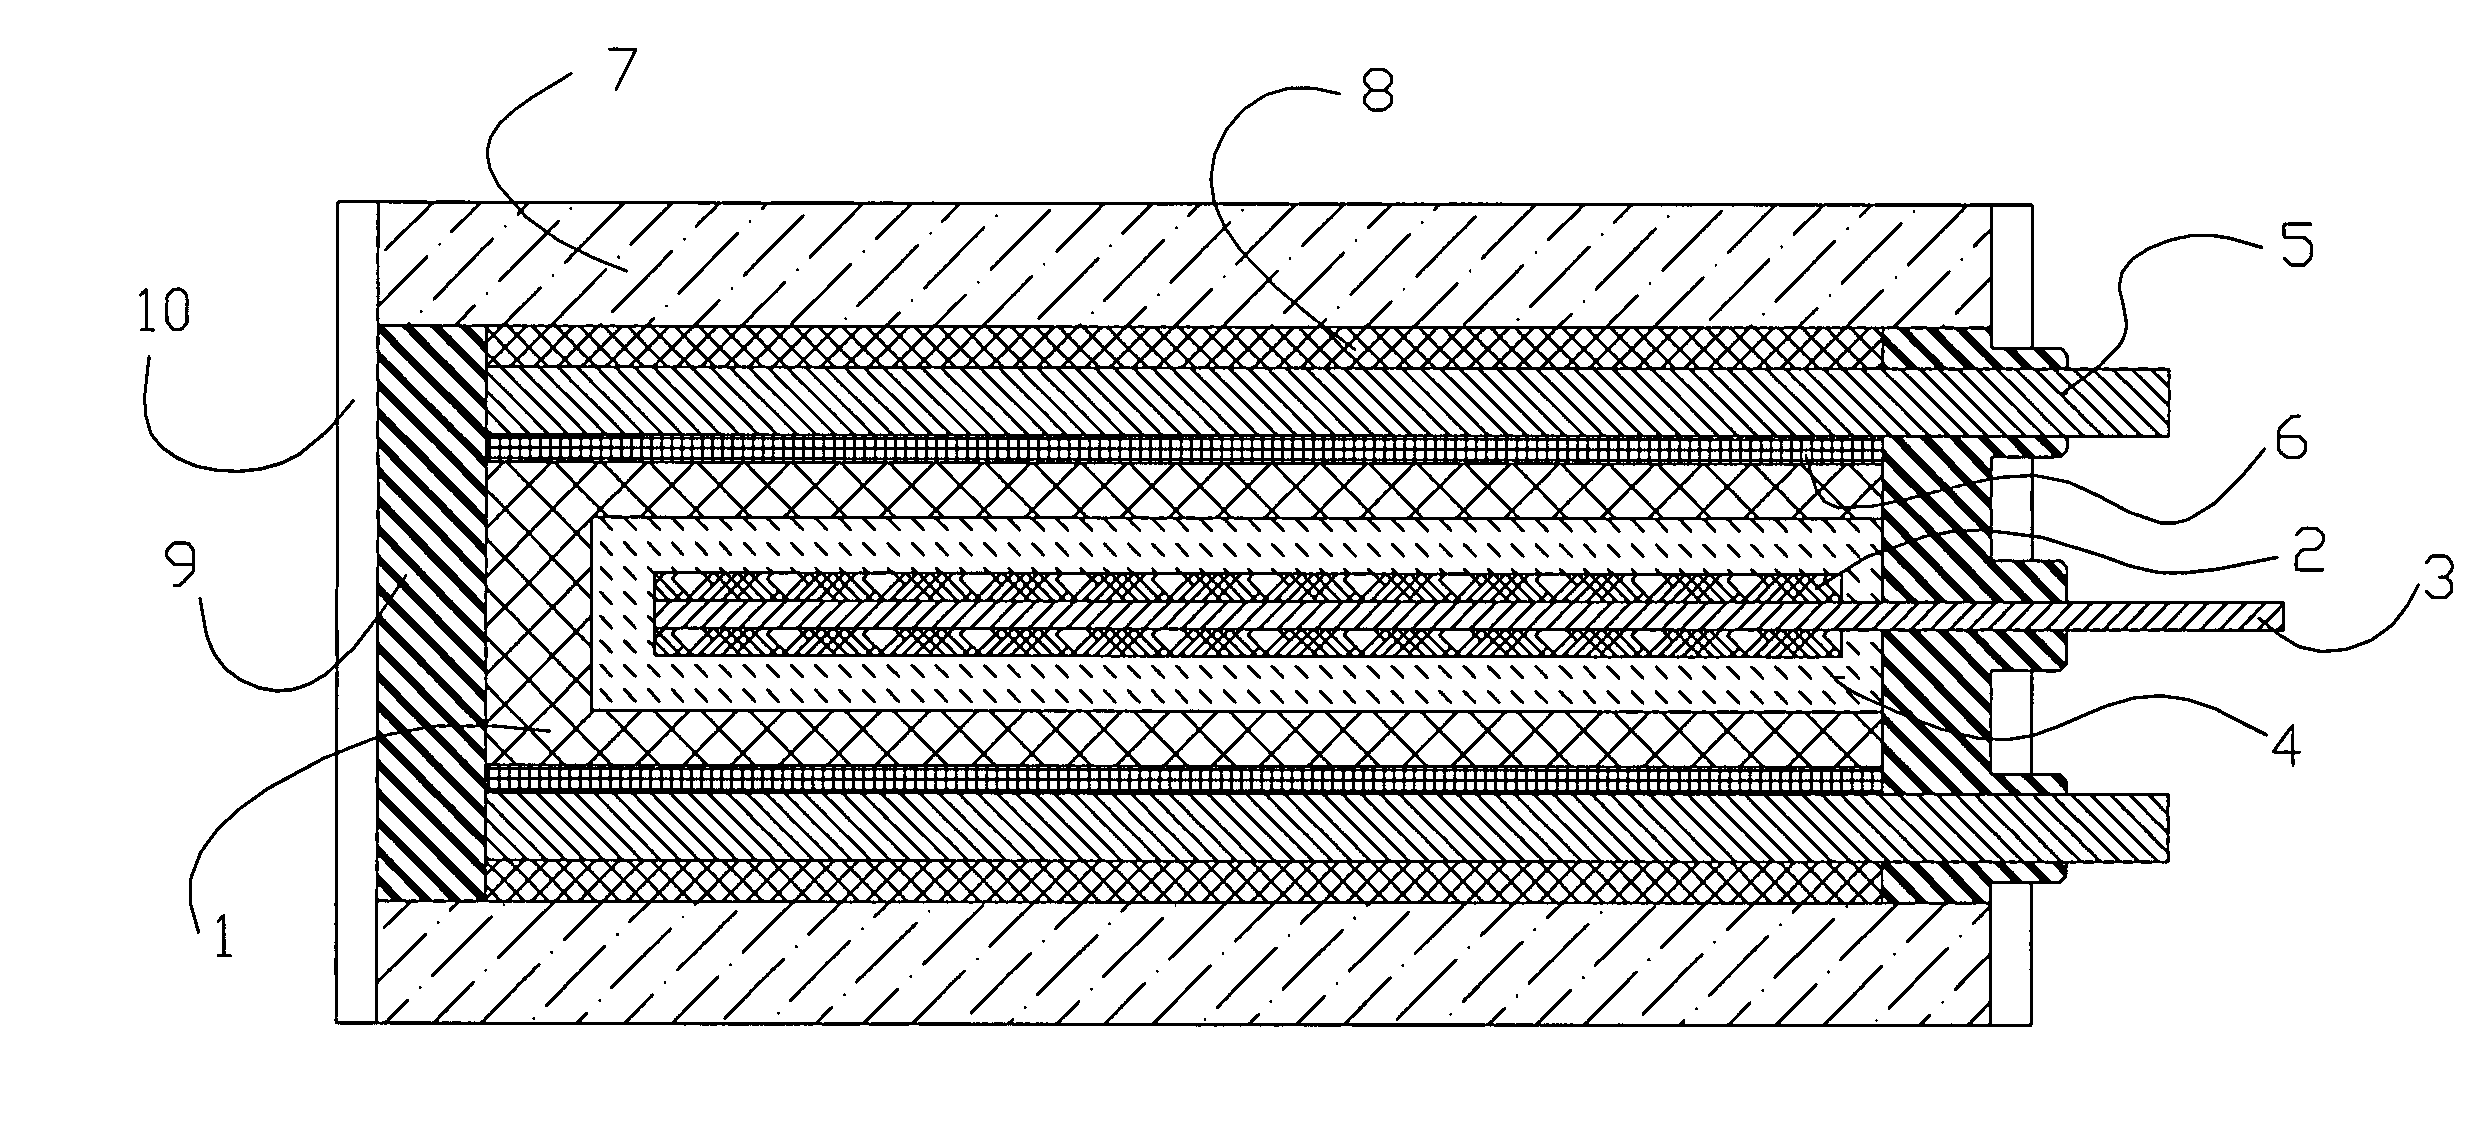 Positive electrode of an electric double layer capacitor